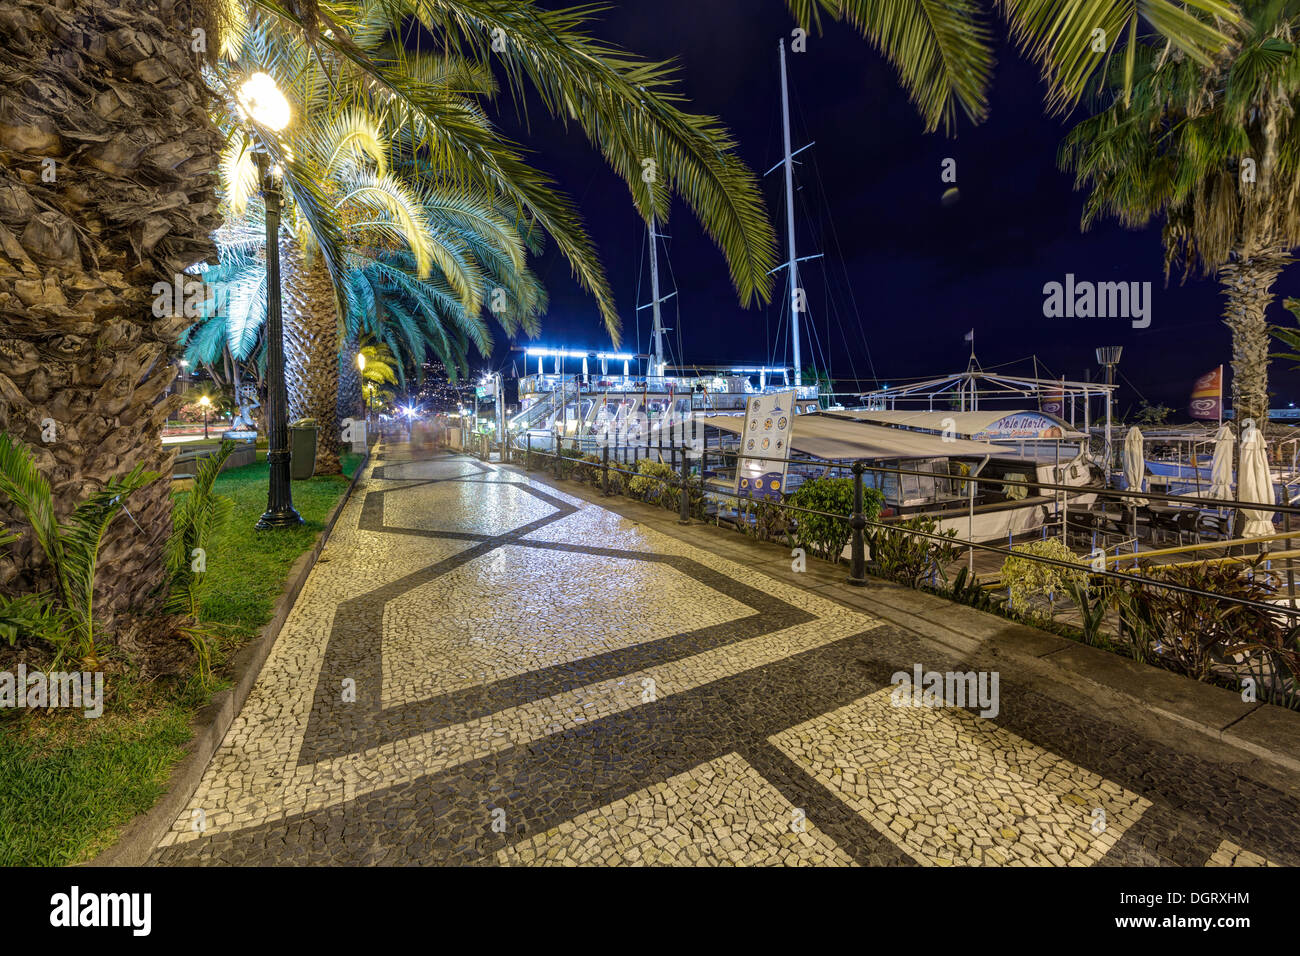 A ship converted into a restaurant on the promenade, port of Funchal, Santa Luzia, Funchal, Madeira, Portugal Stock Photo